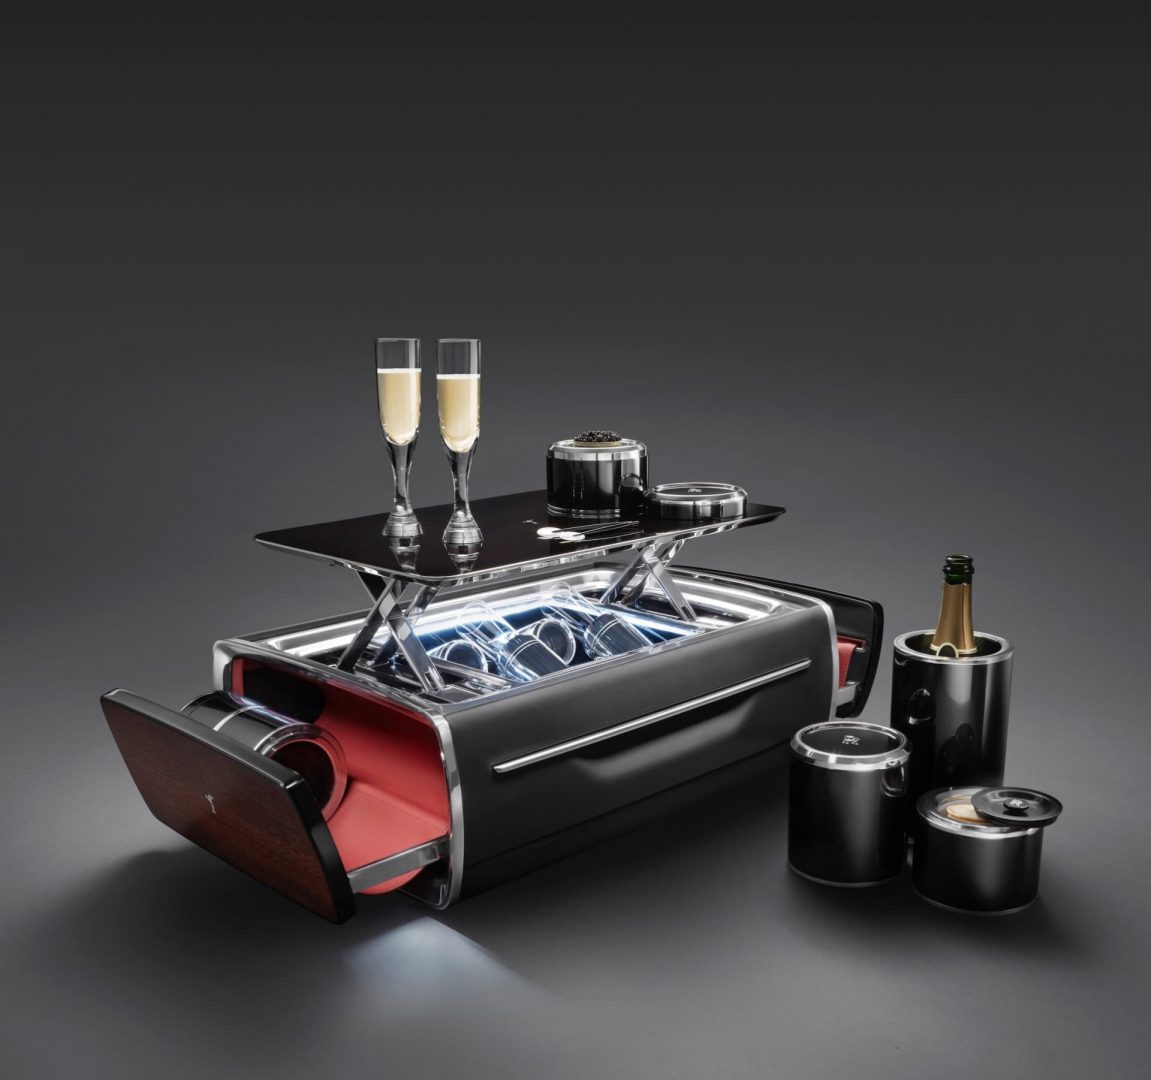 m2-rolls-royce-champagne-coolers